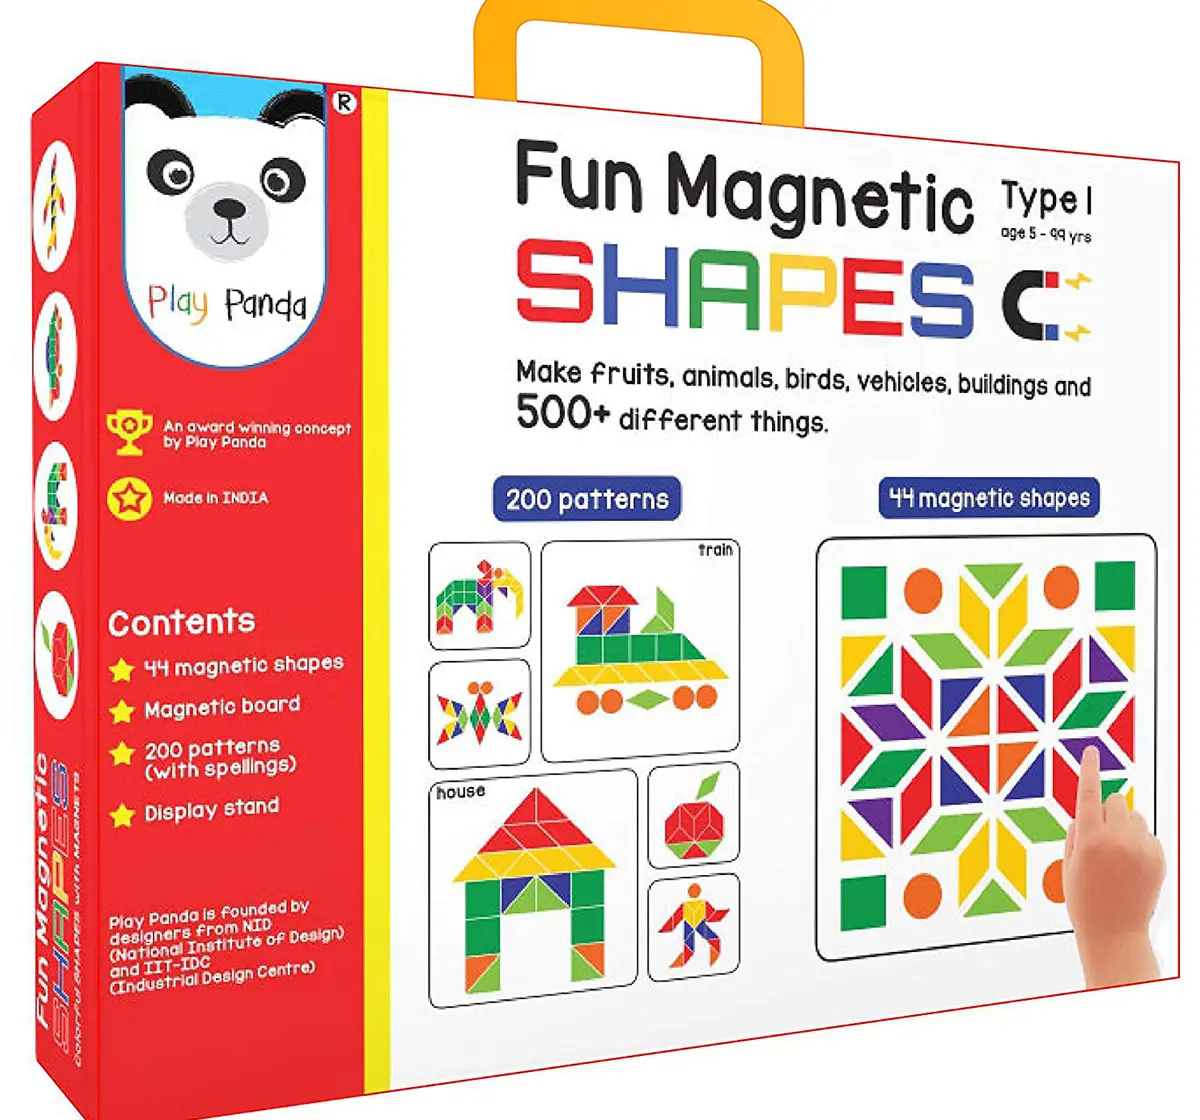 Play Panda Fun Magnetic Shapes (Junior) : Type 1 With 44 Magnetic Shapes, 200 Pattern Book, Magnetic Board And Display Stand Puzzles for Kids Age 5Y+